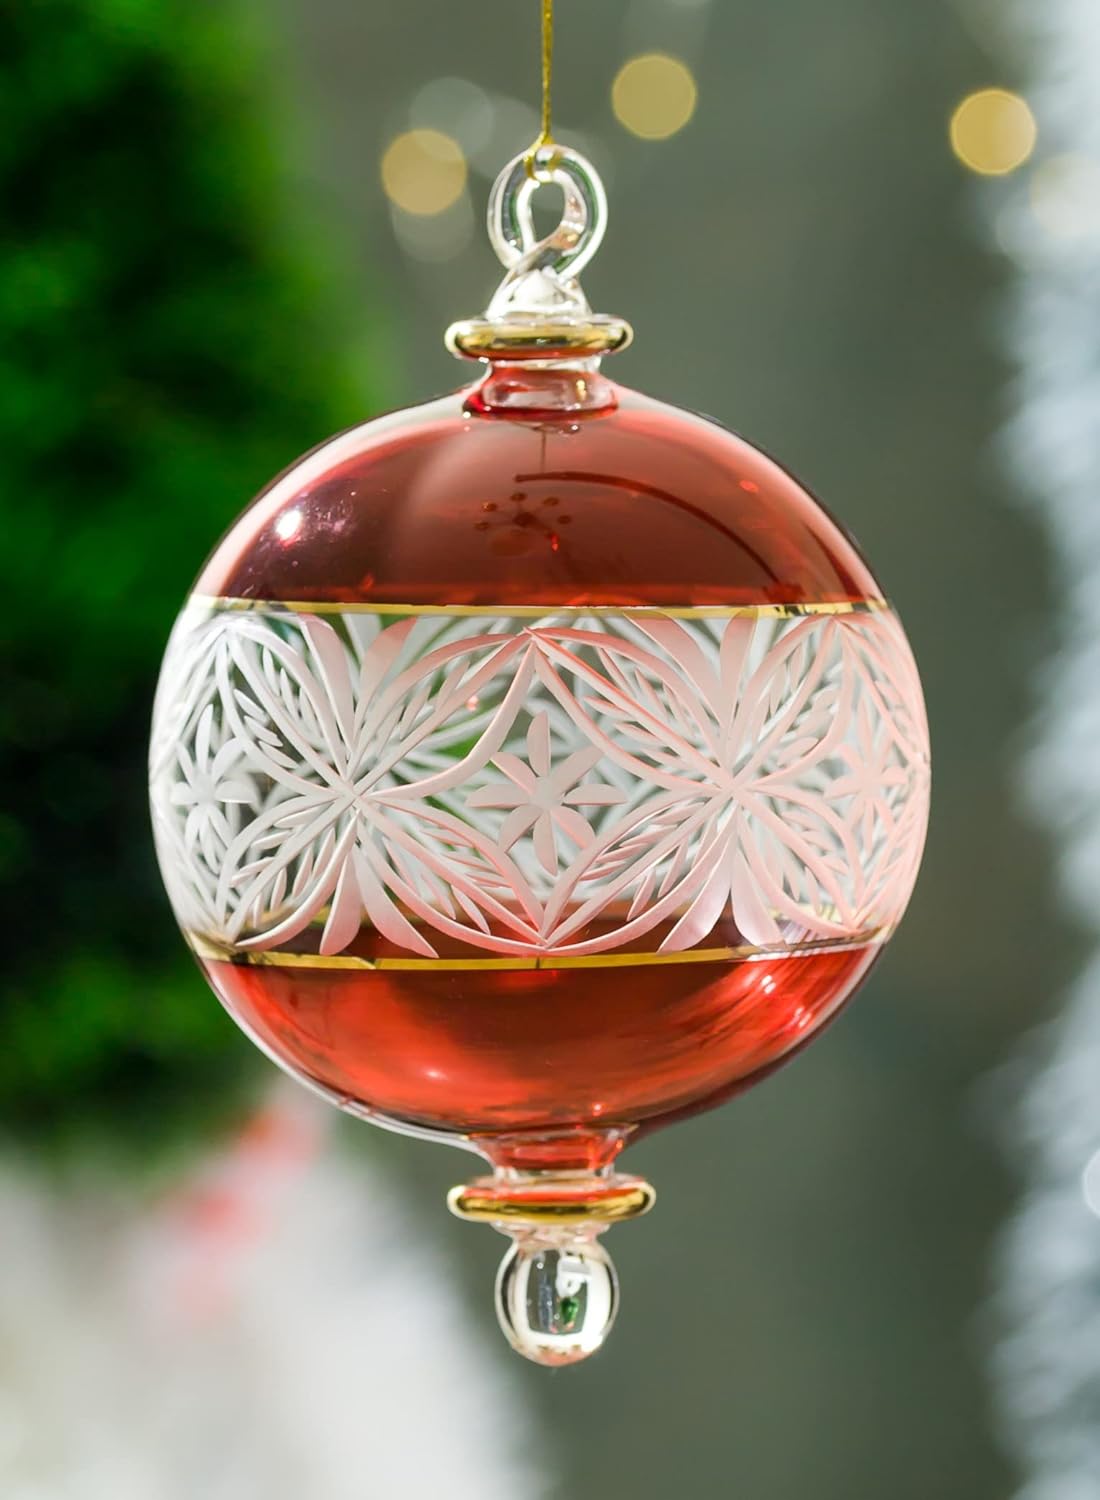 Red and Clear Engraved Glass Christmas Ornament for Christmas Tree Decorations - Les Trois Pyramides